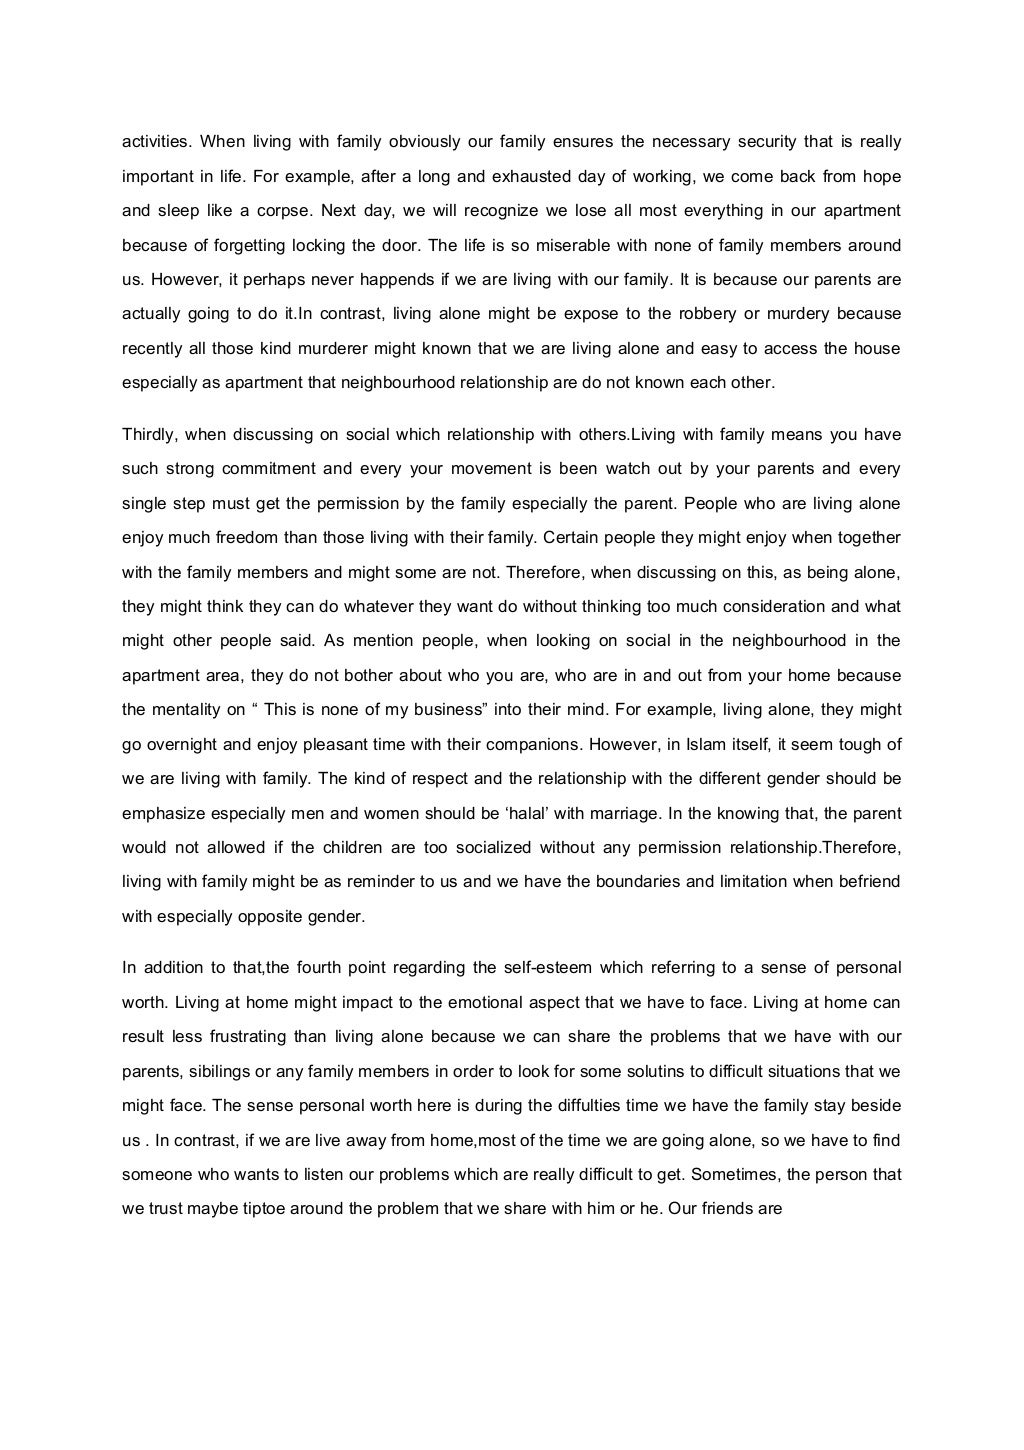 essay about home alone